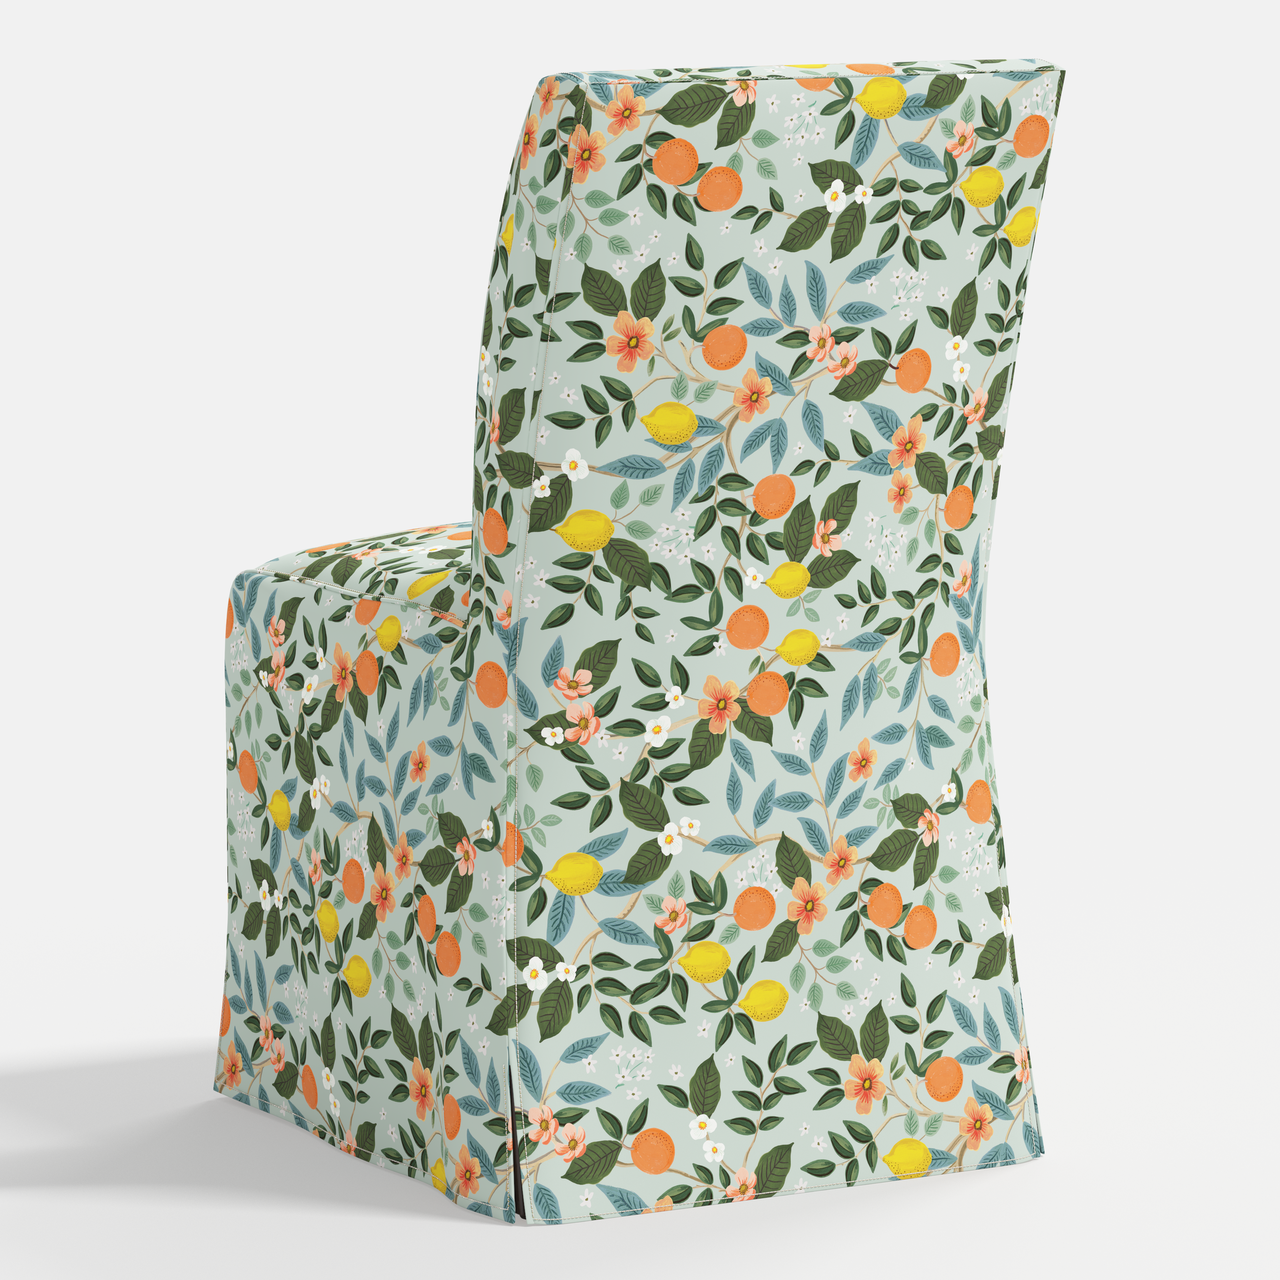 Frances Slipcover Dining Chair